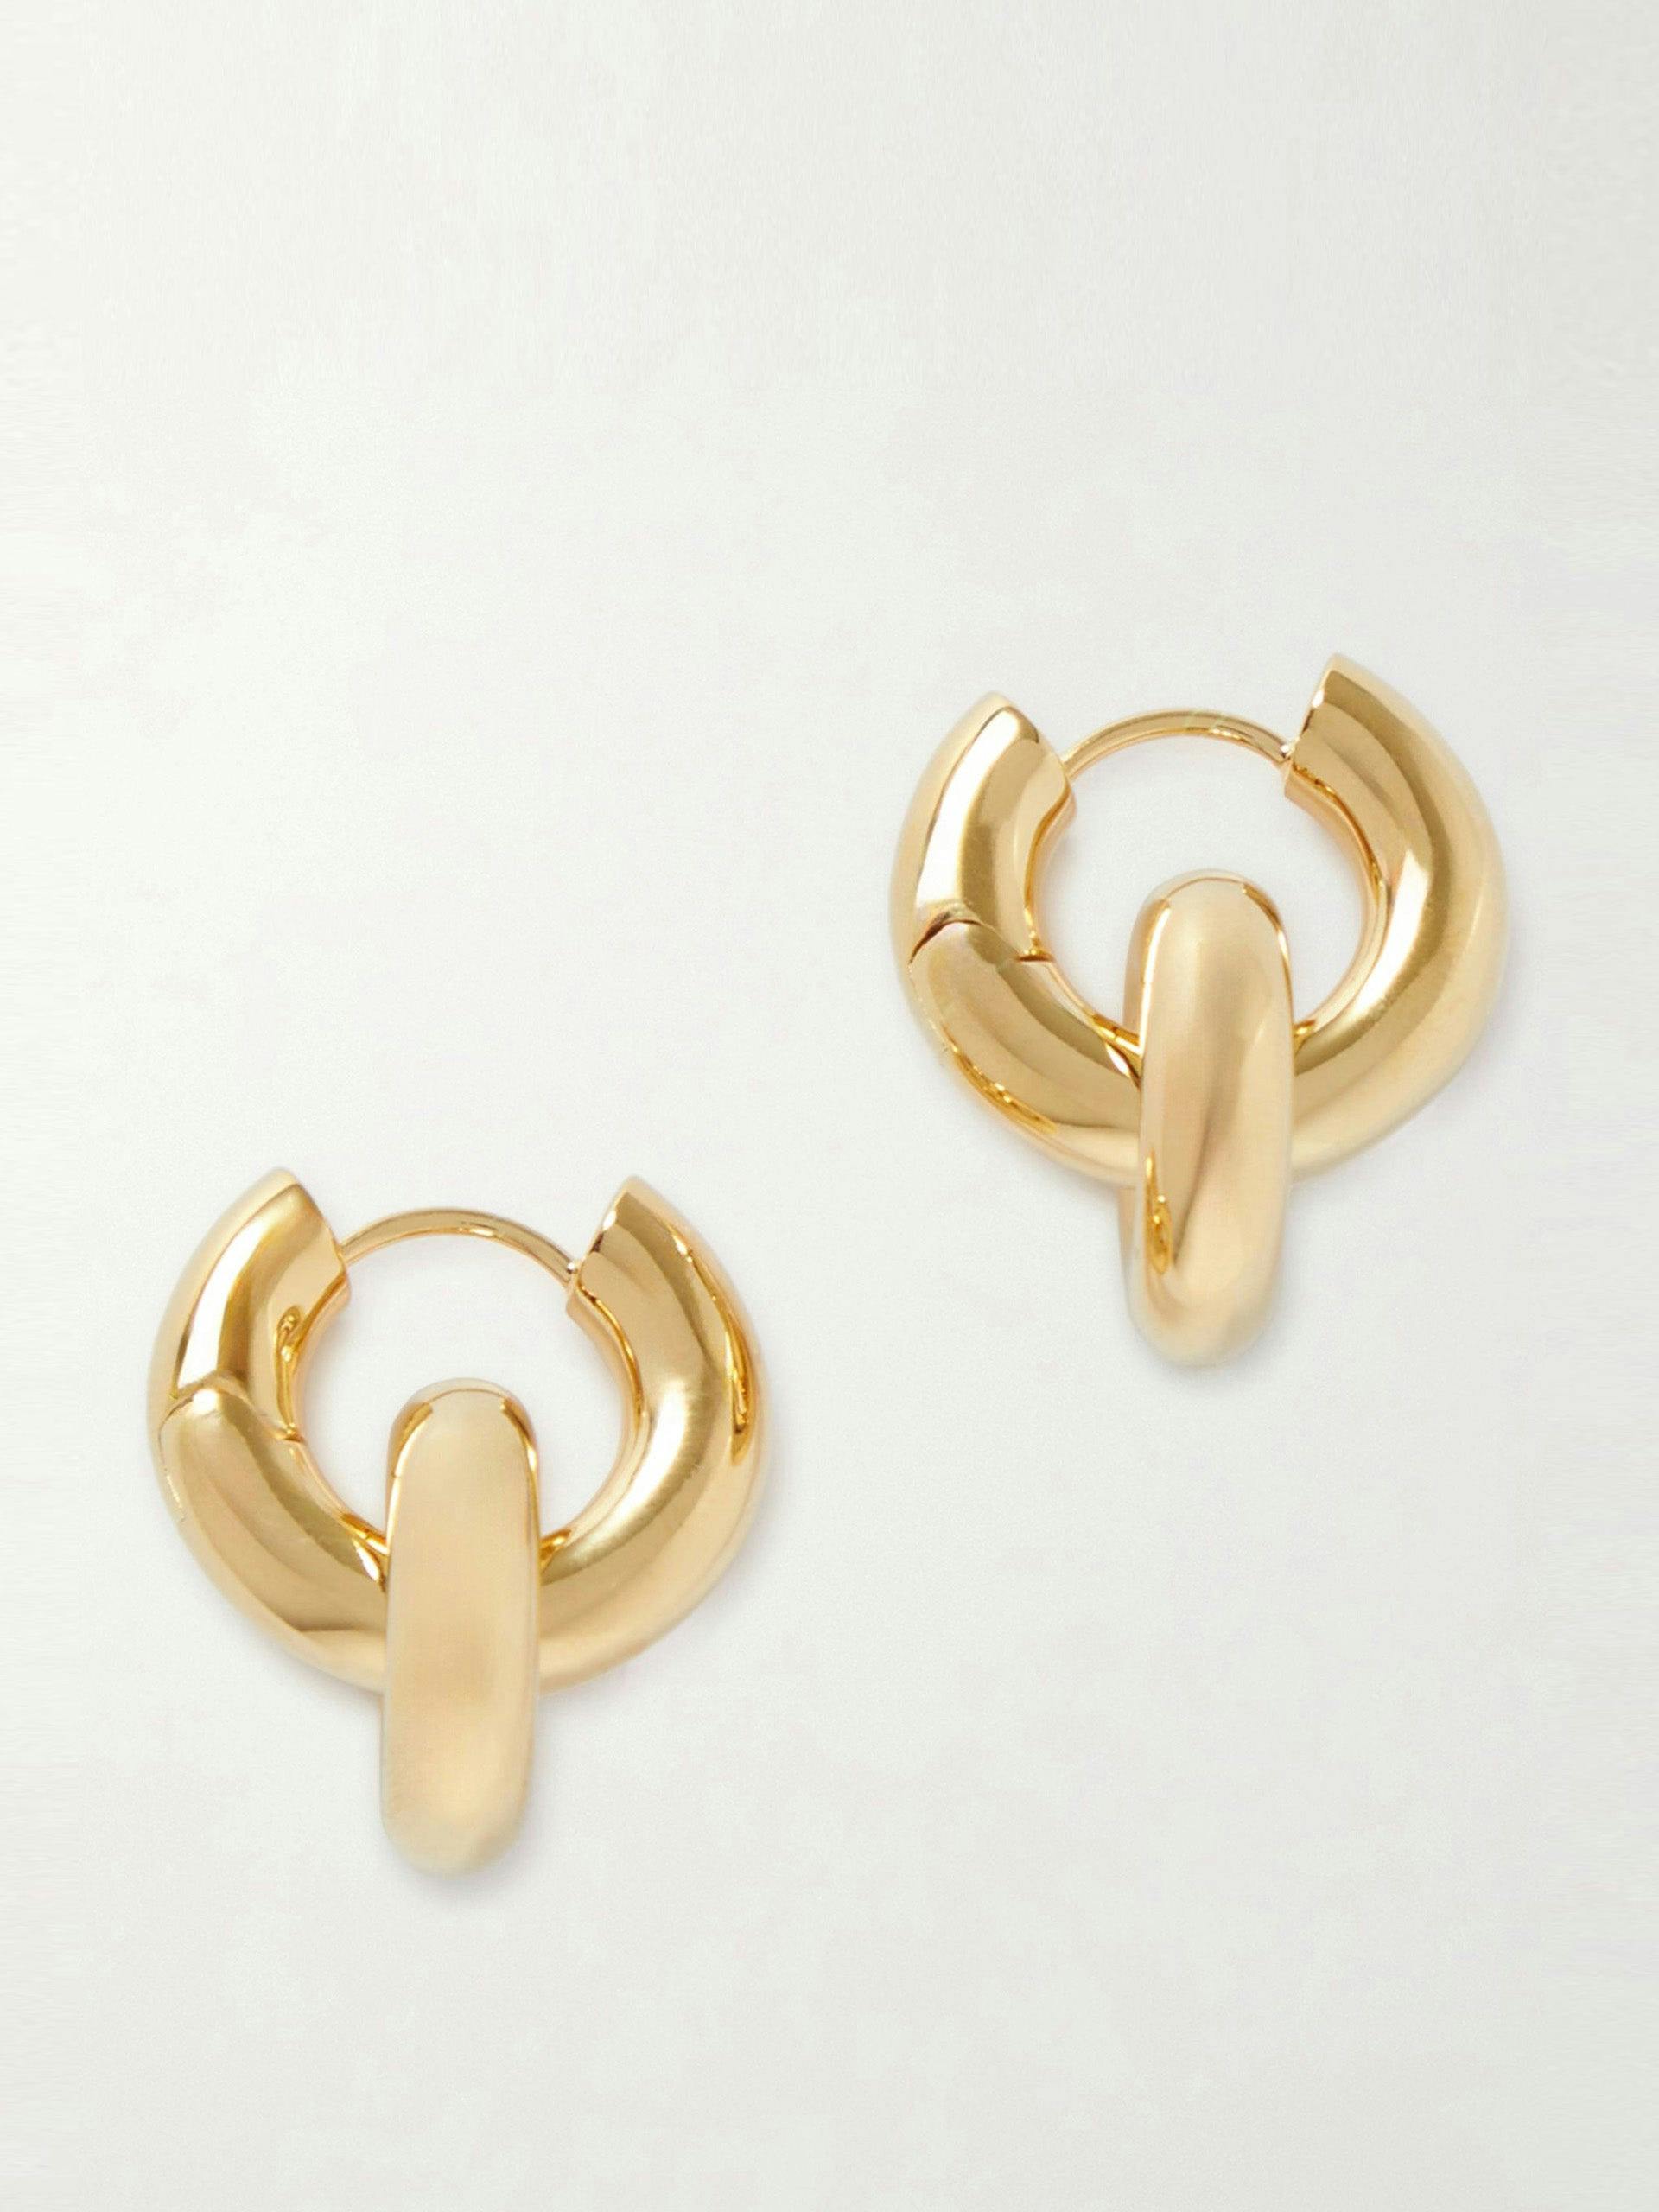 The Esther gold-plated hoop earrings